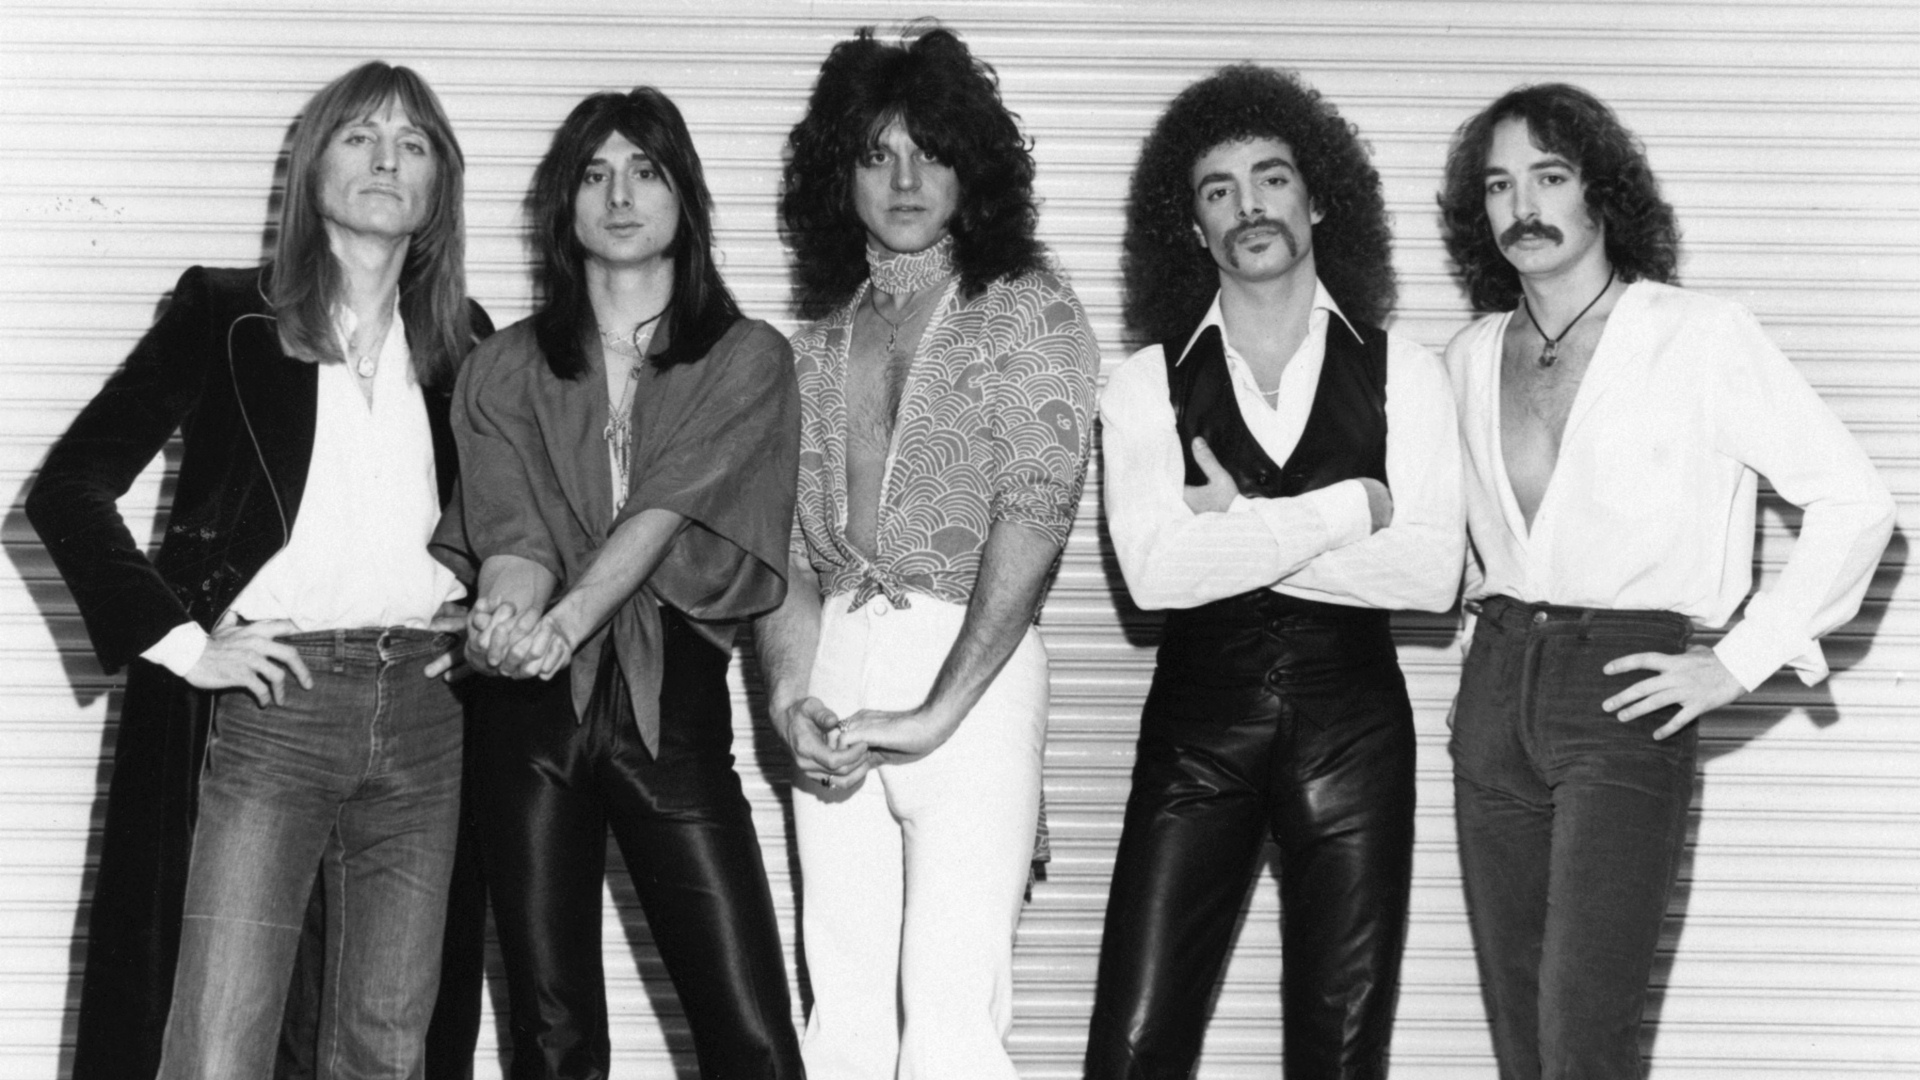 journey band members 1979